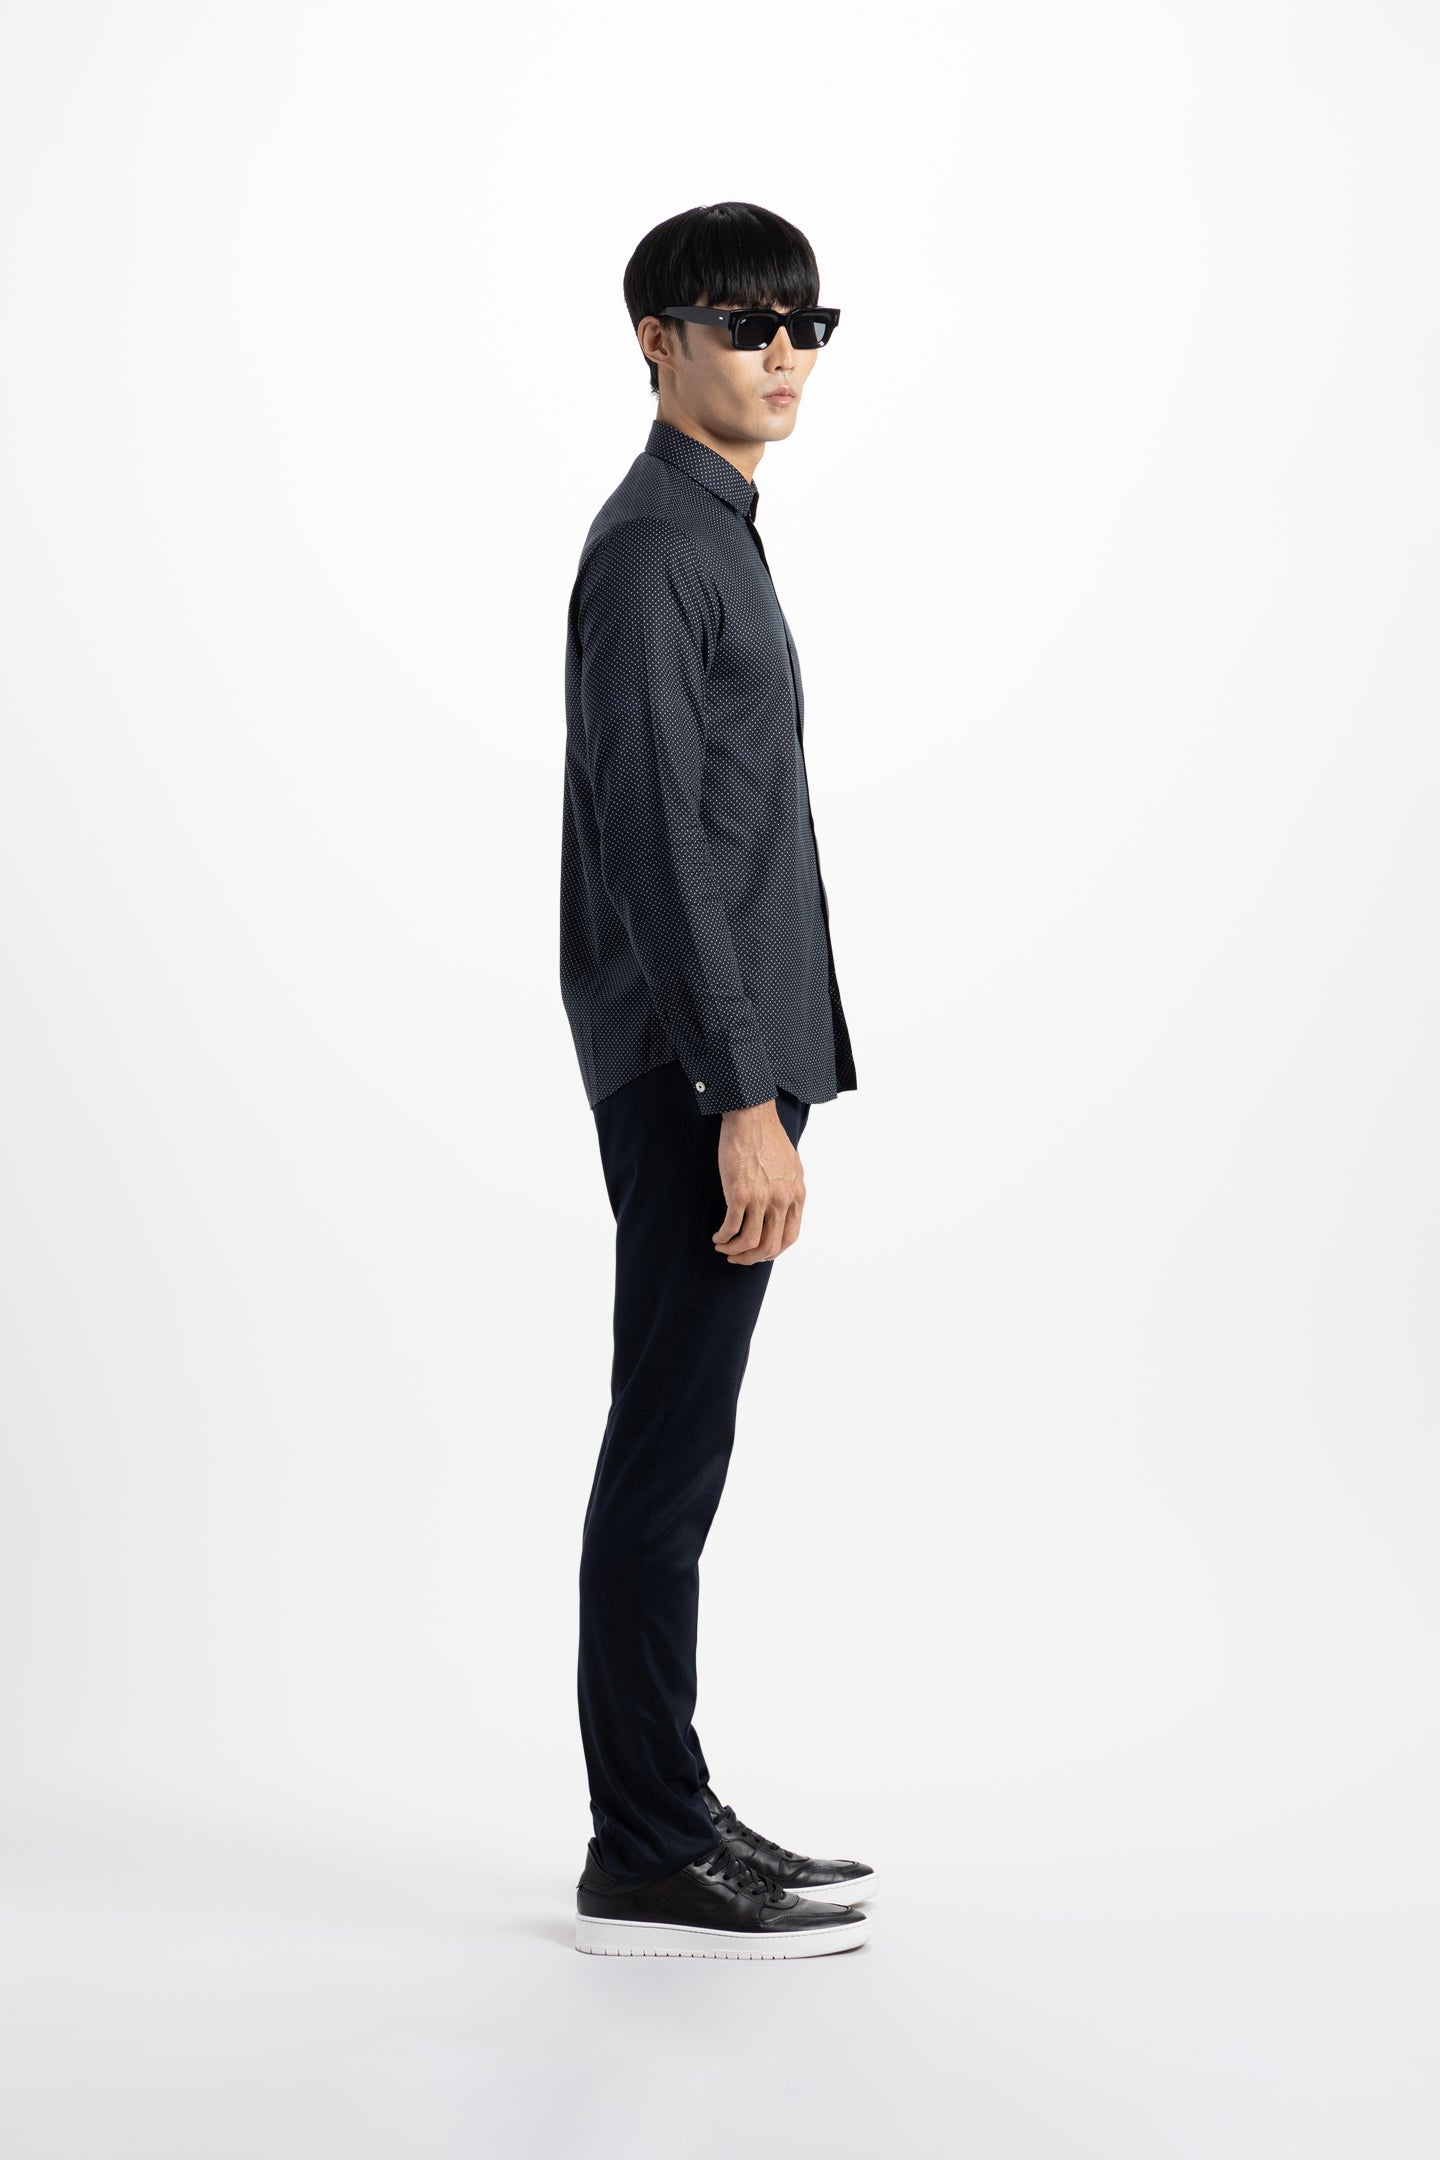 Soft Point Collar by Proper Cloth